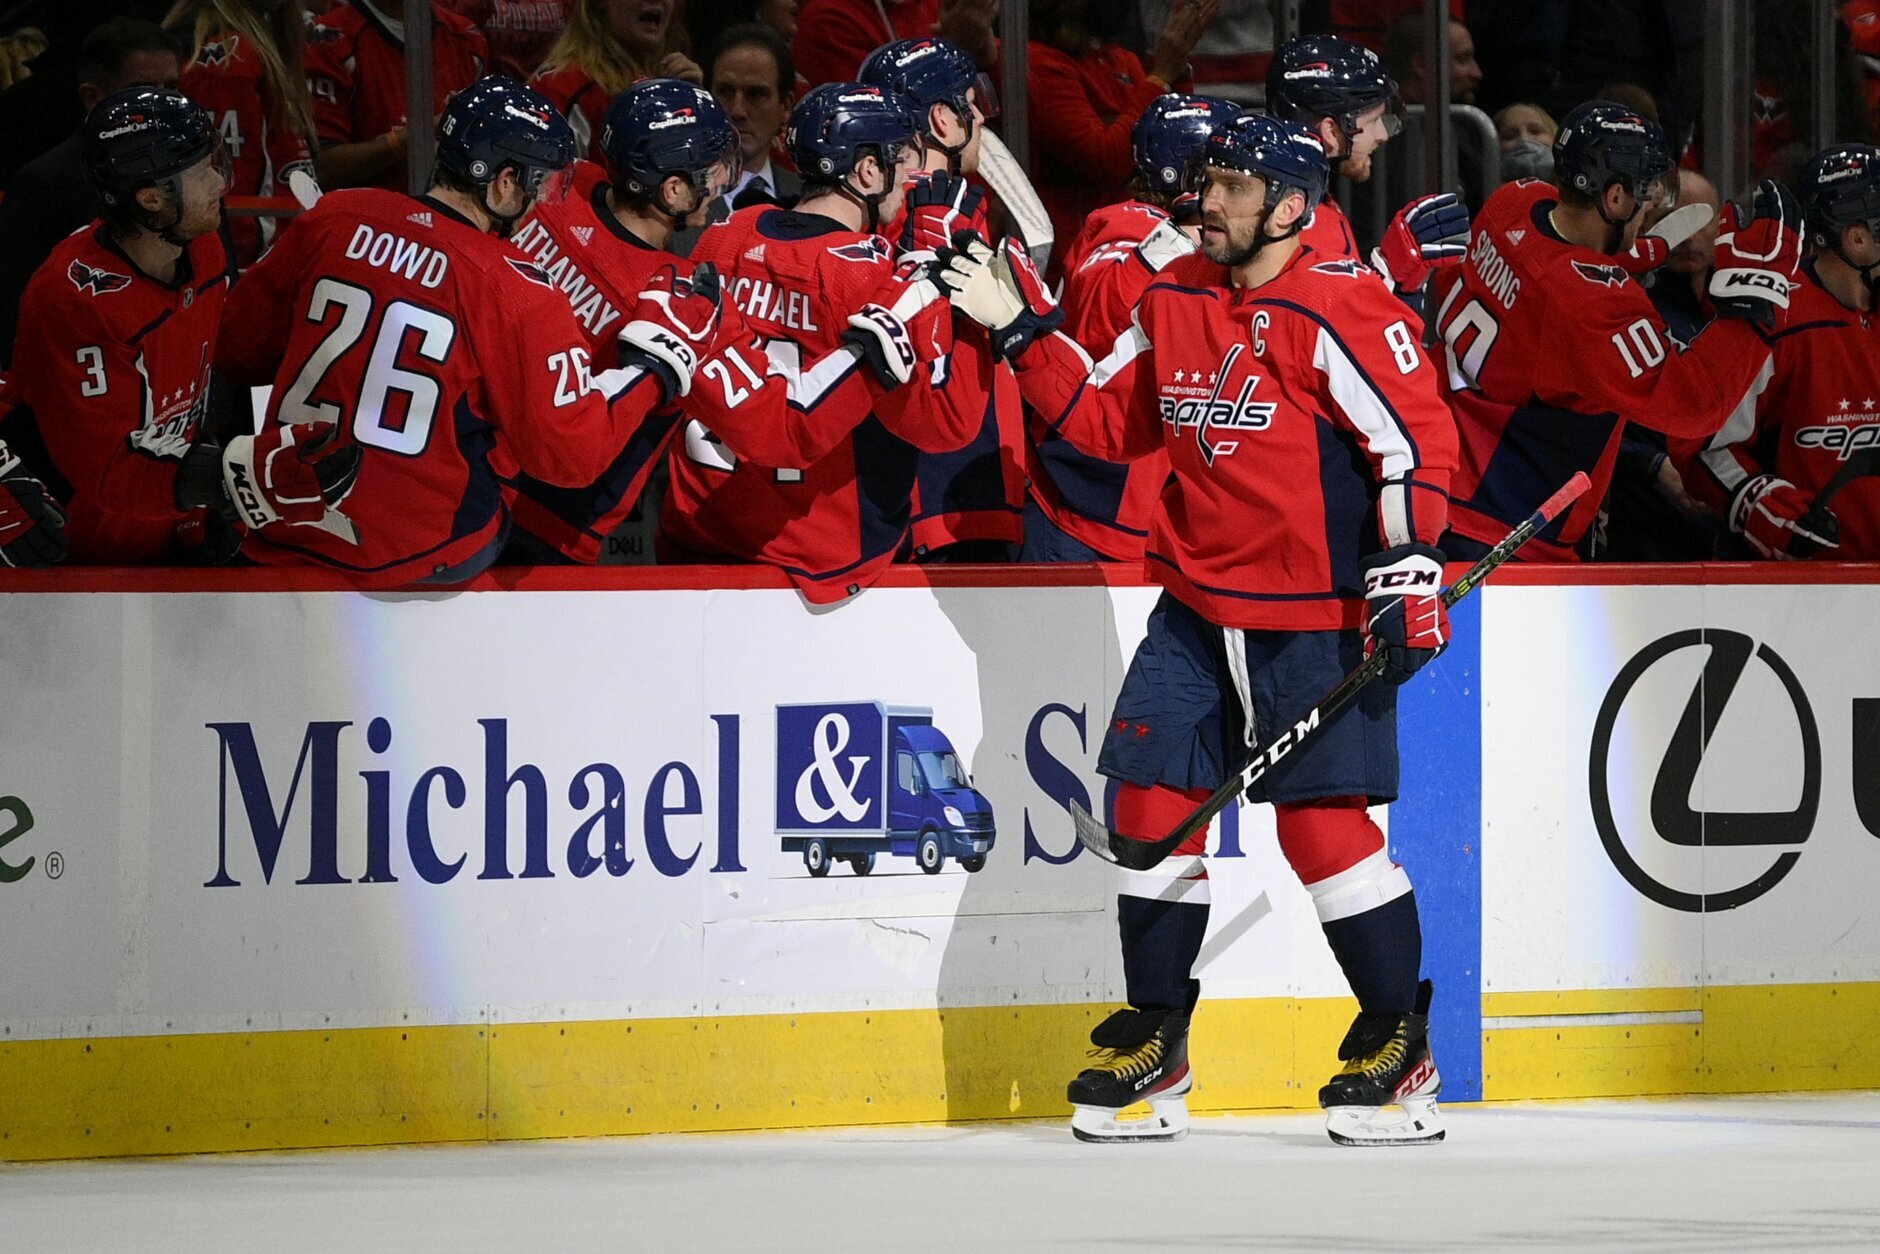 Phillips scores against old team, Capitals beat Flames 3-2 in